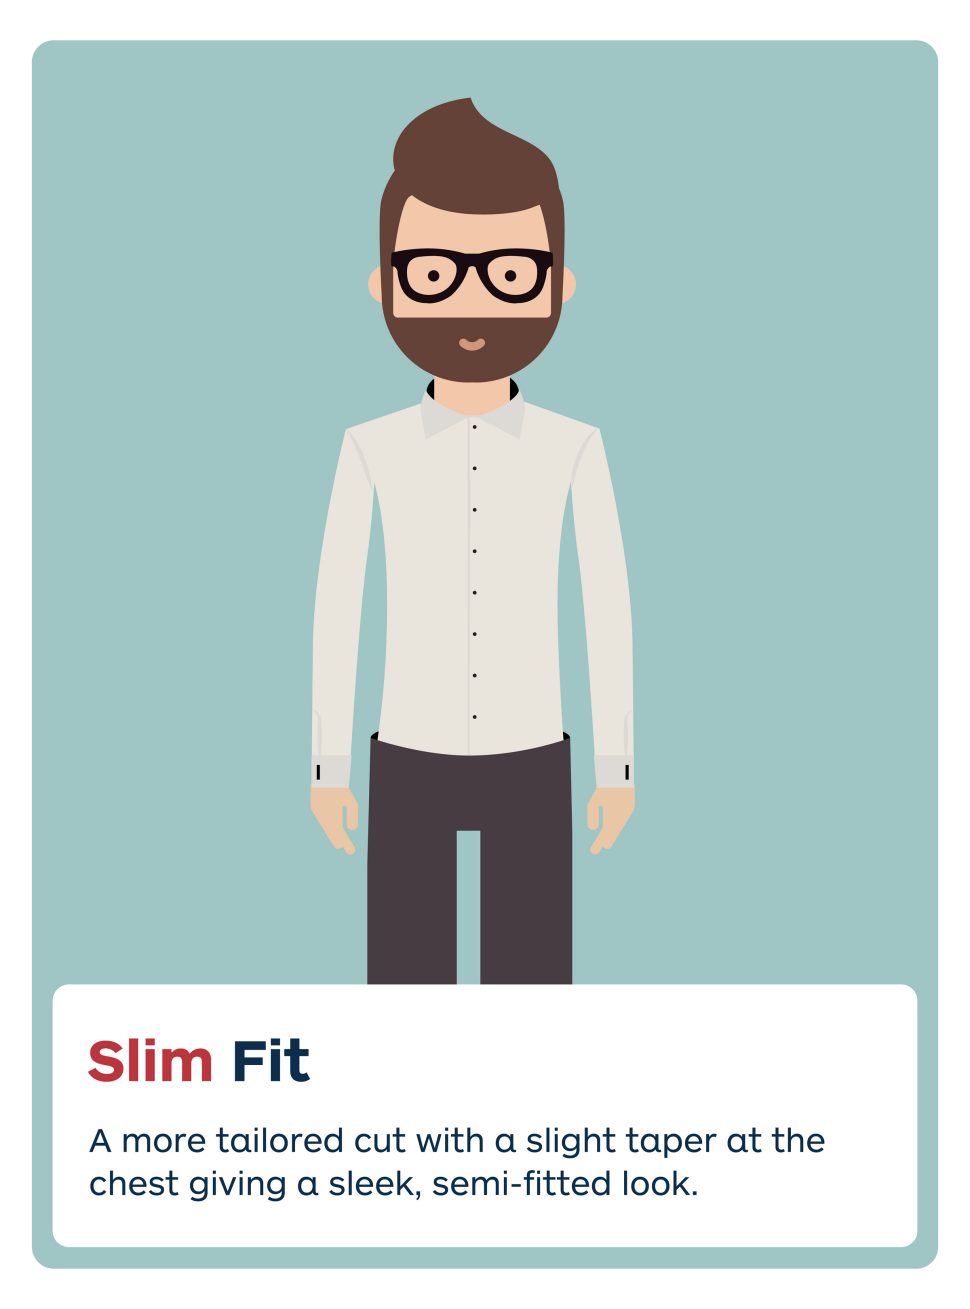 Slim fit.
A more tailored cut with a slight taper at the chest giving a sleek, semi-fitted look.